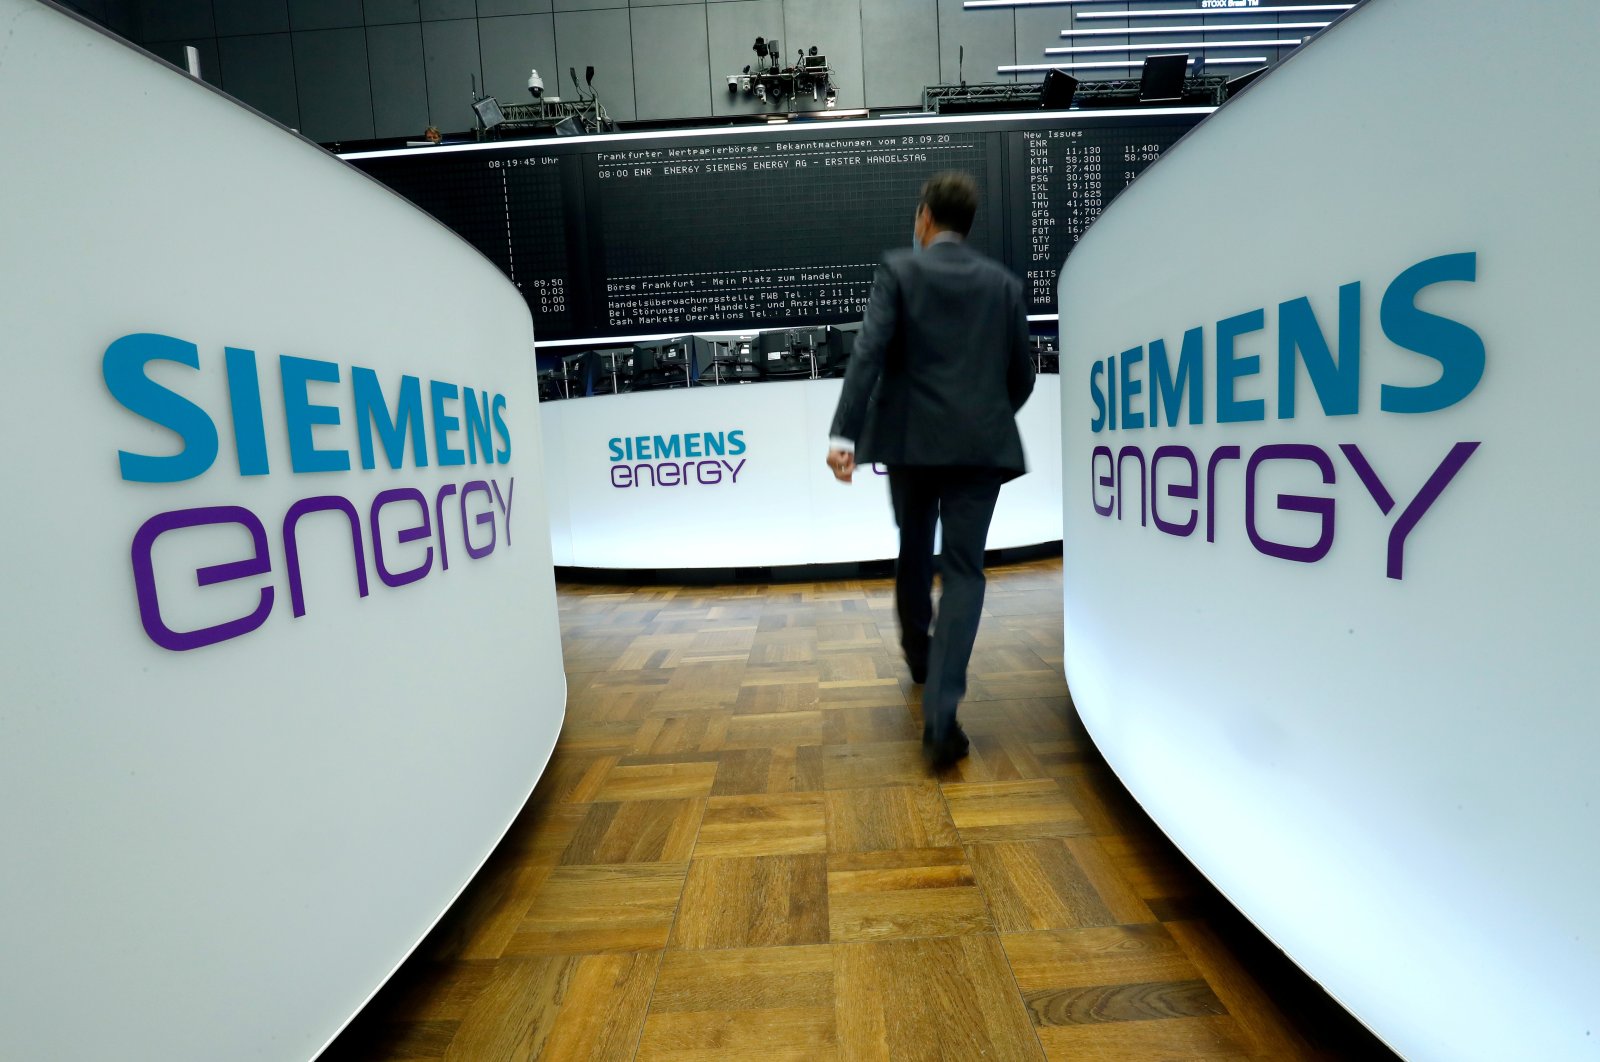 A trader walks next to Siemens Energy AG logos during Siemens Energy's initial public offering (IPO) at the Frankfurt Stock Exchange in Frankfurt, Germany, Sept., 28, 2020. (Reuters Photo)